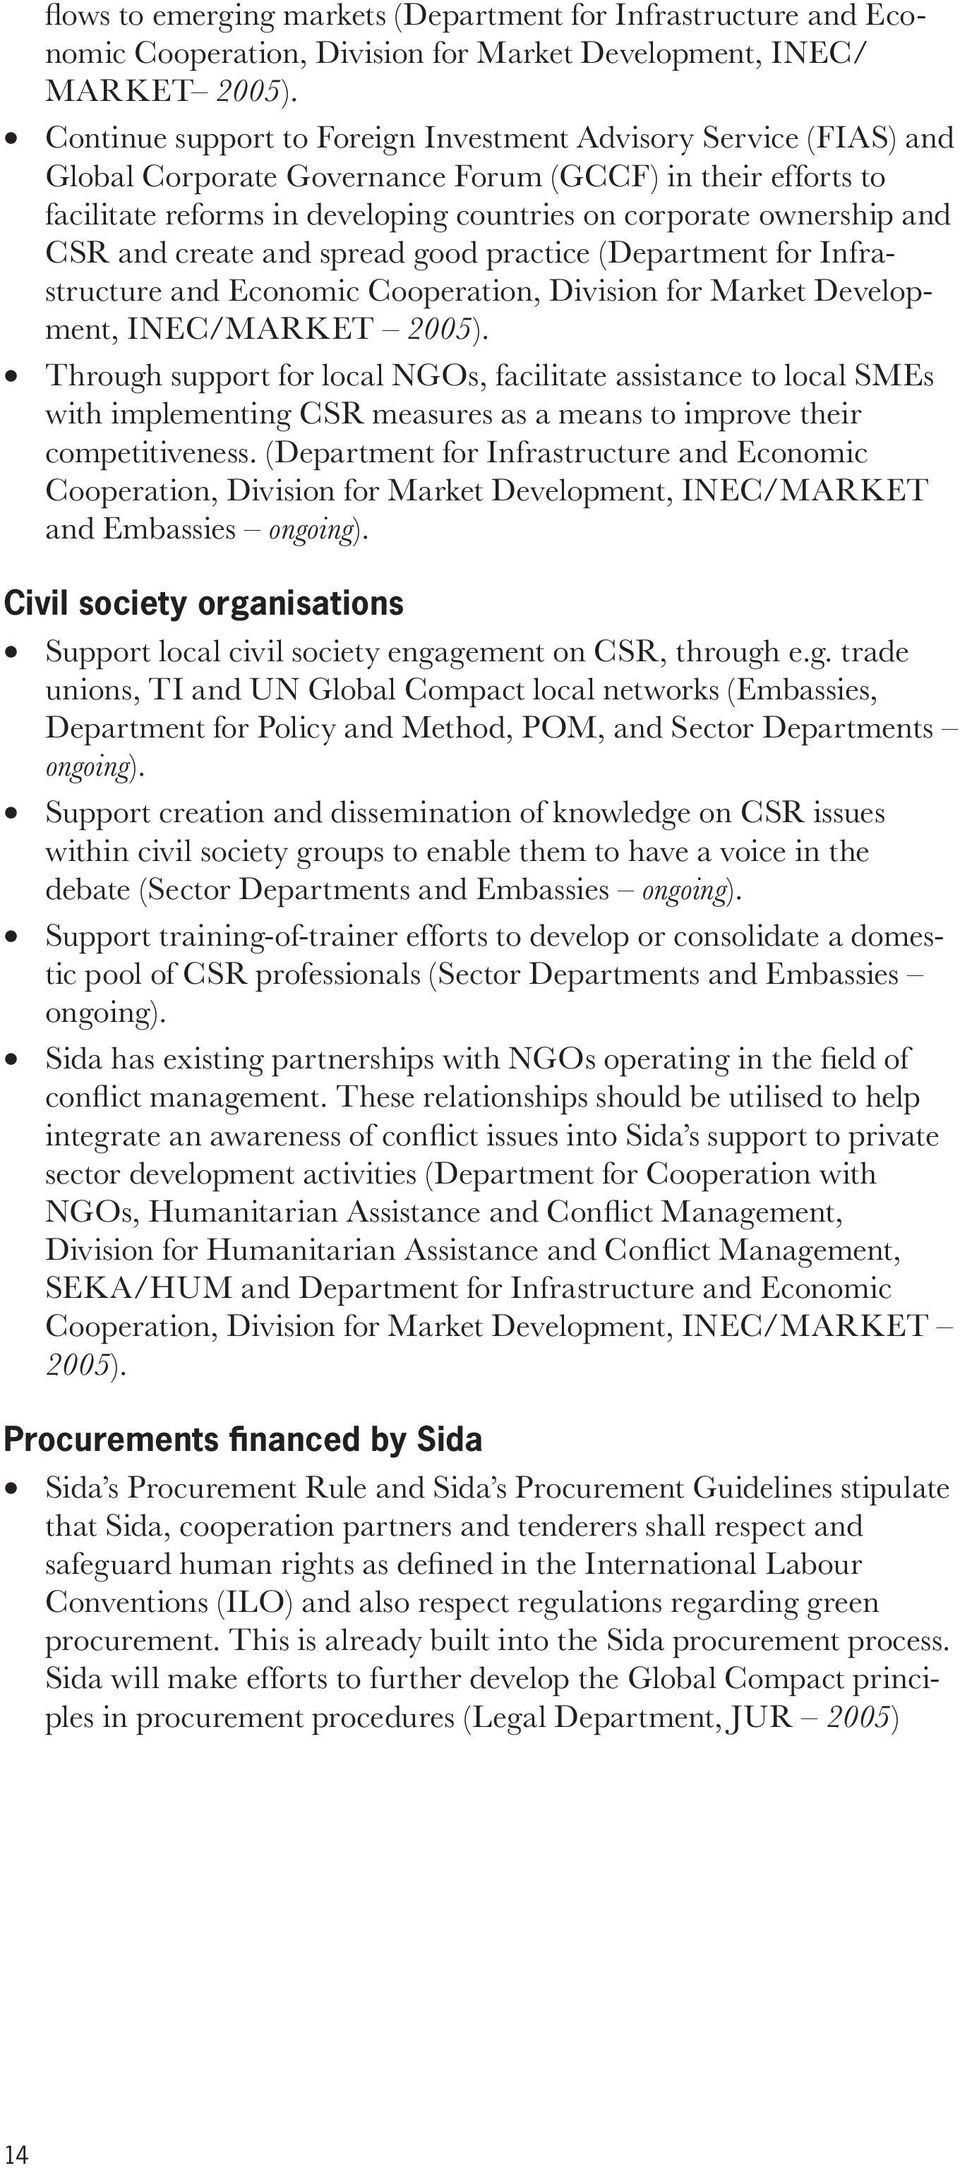 CSR and create and spread good practice (Department for Infrastructure and Economic Cooperation, Division for Market Development, INEC/MARKET 2005).